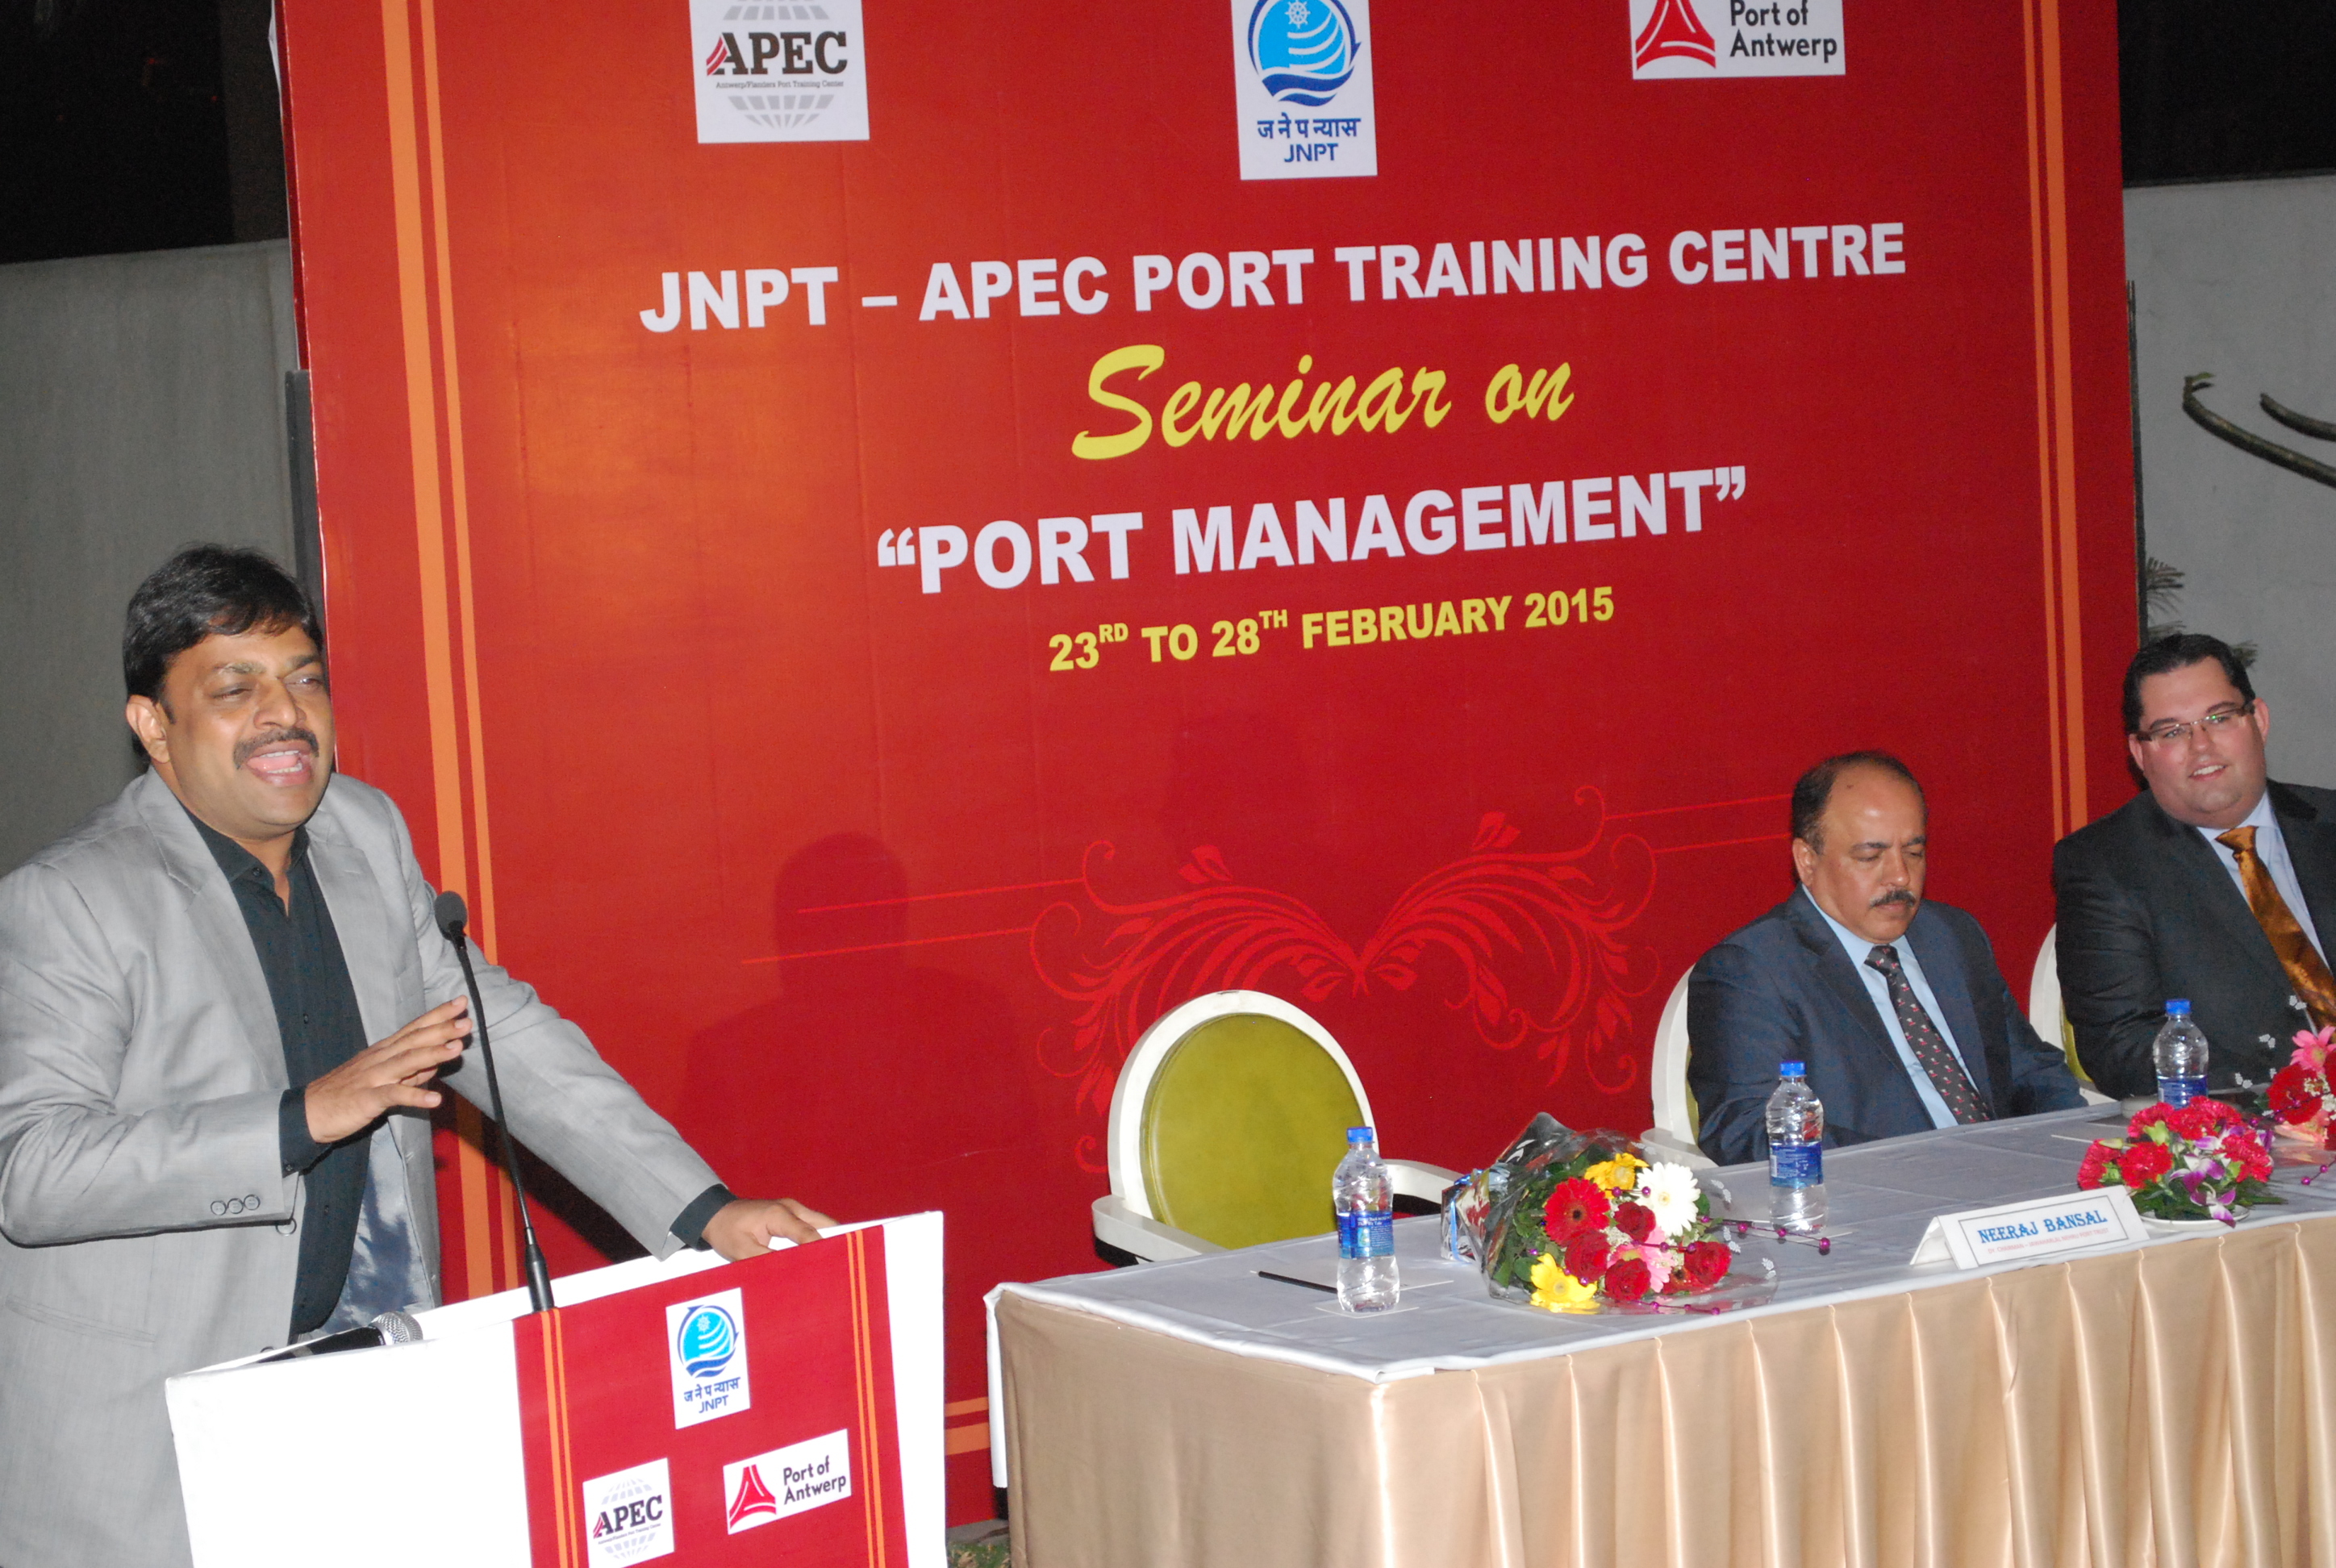 Official opening of the Februar 2015 port management seminar